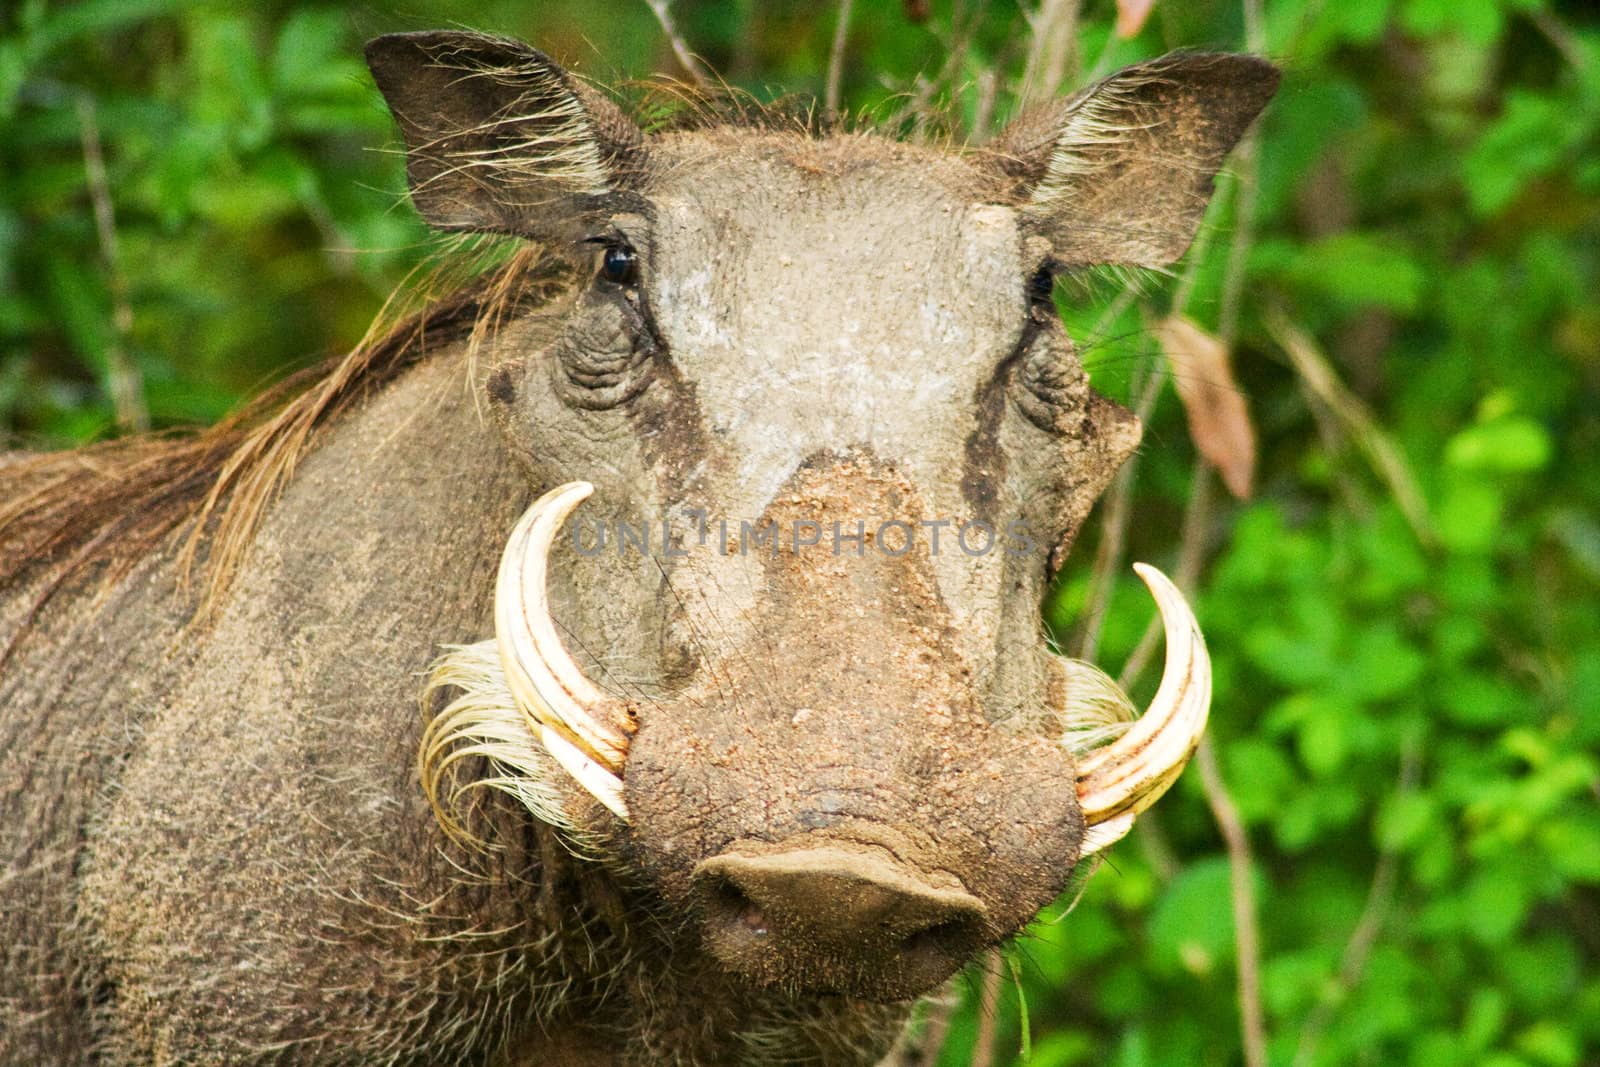 Warthog (Phacochoerus africanus) photographed in Kruger National Park, South Africa.